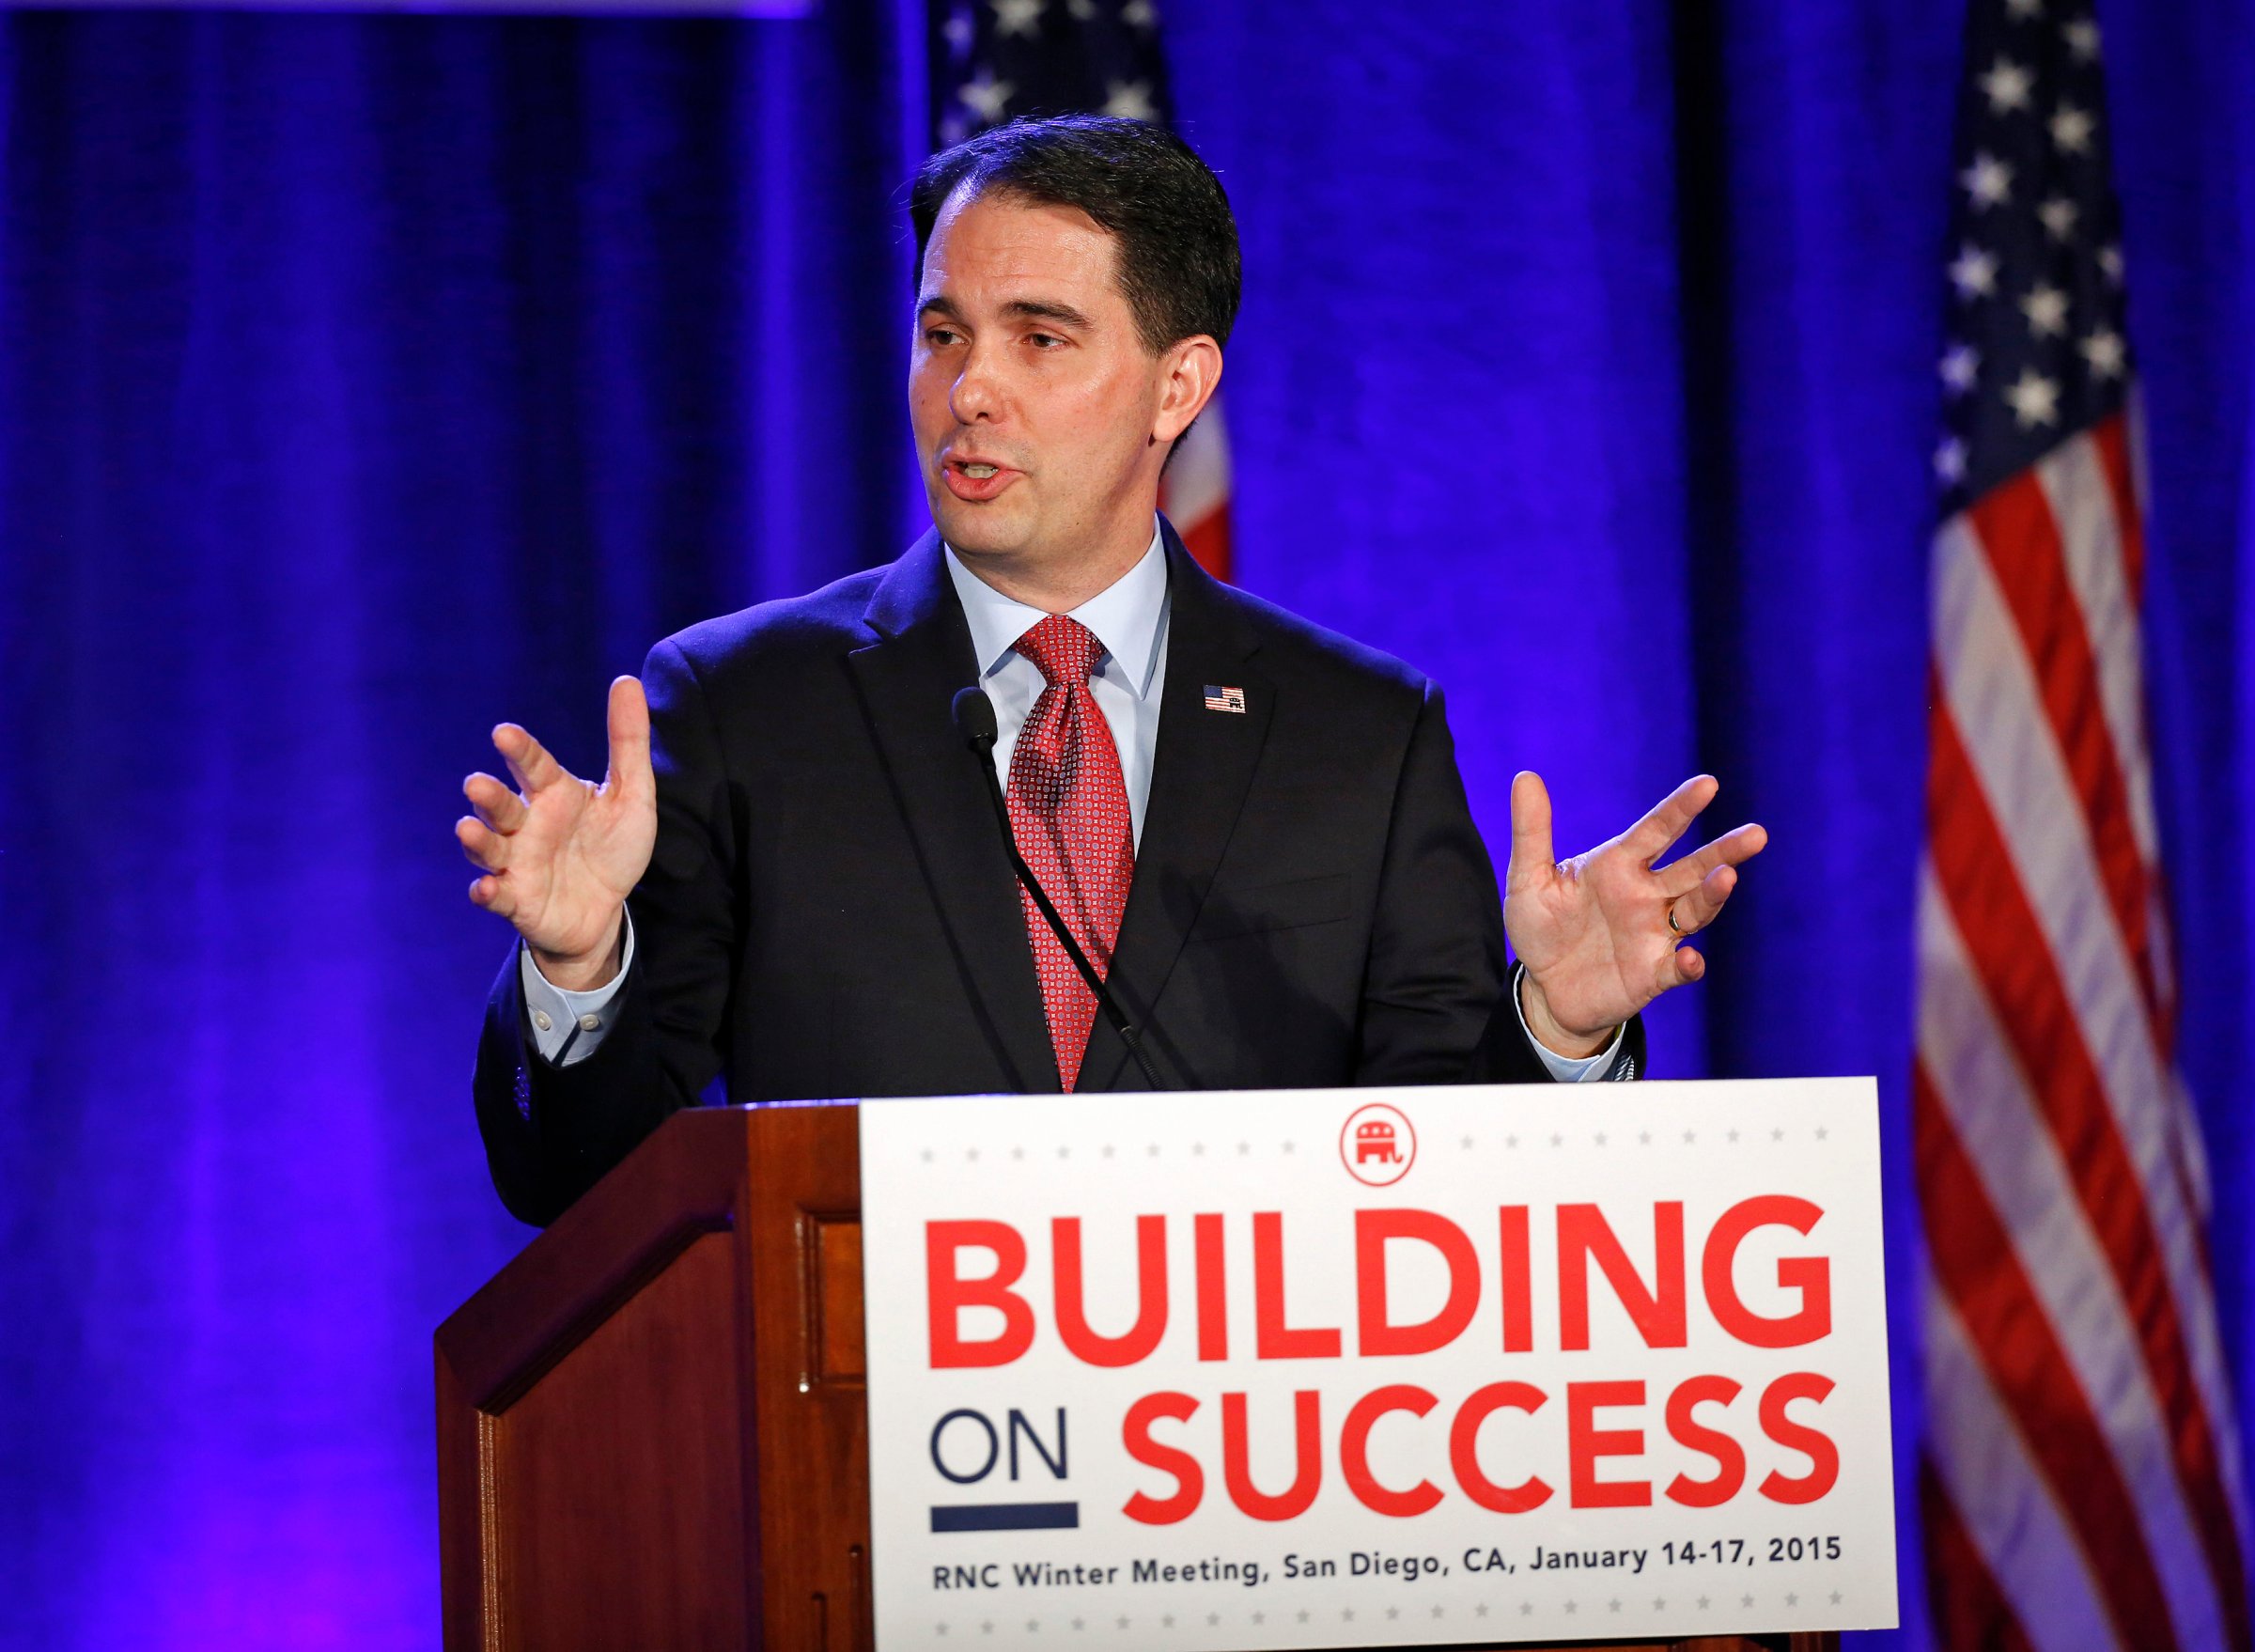 Republican National Committtee's "Building on Success" meeting in San Diego